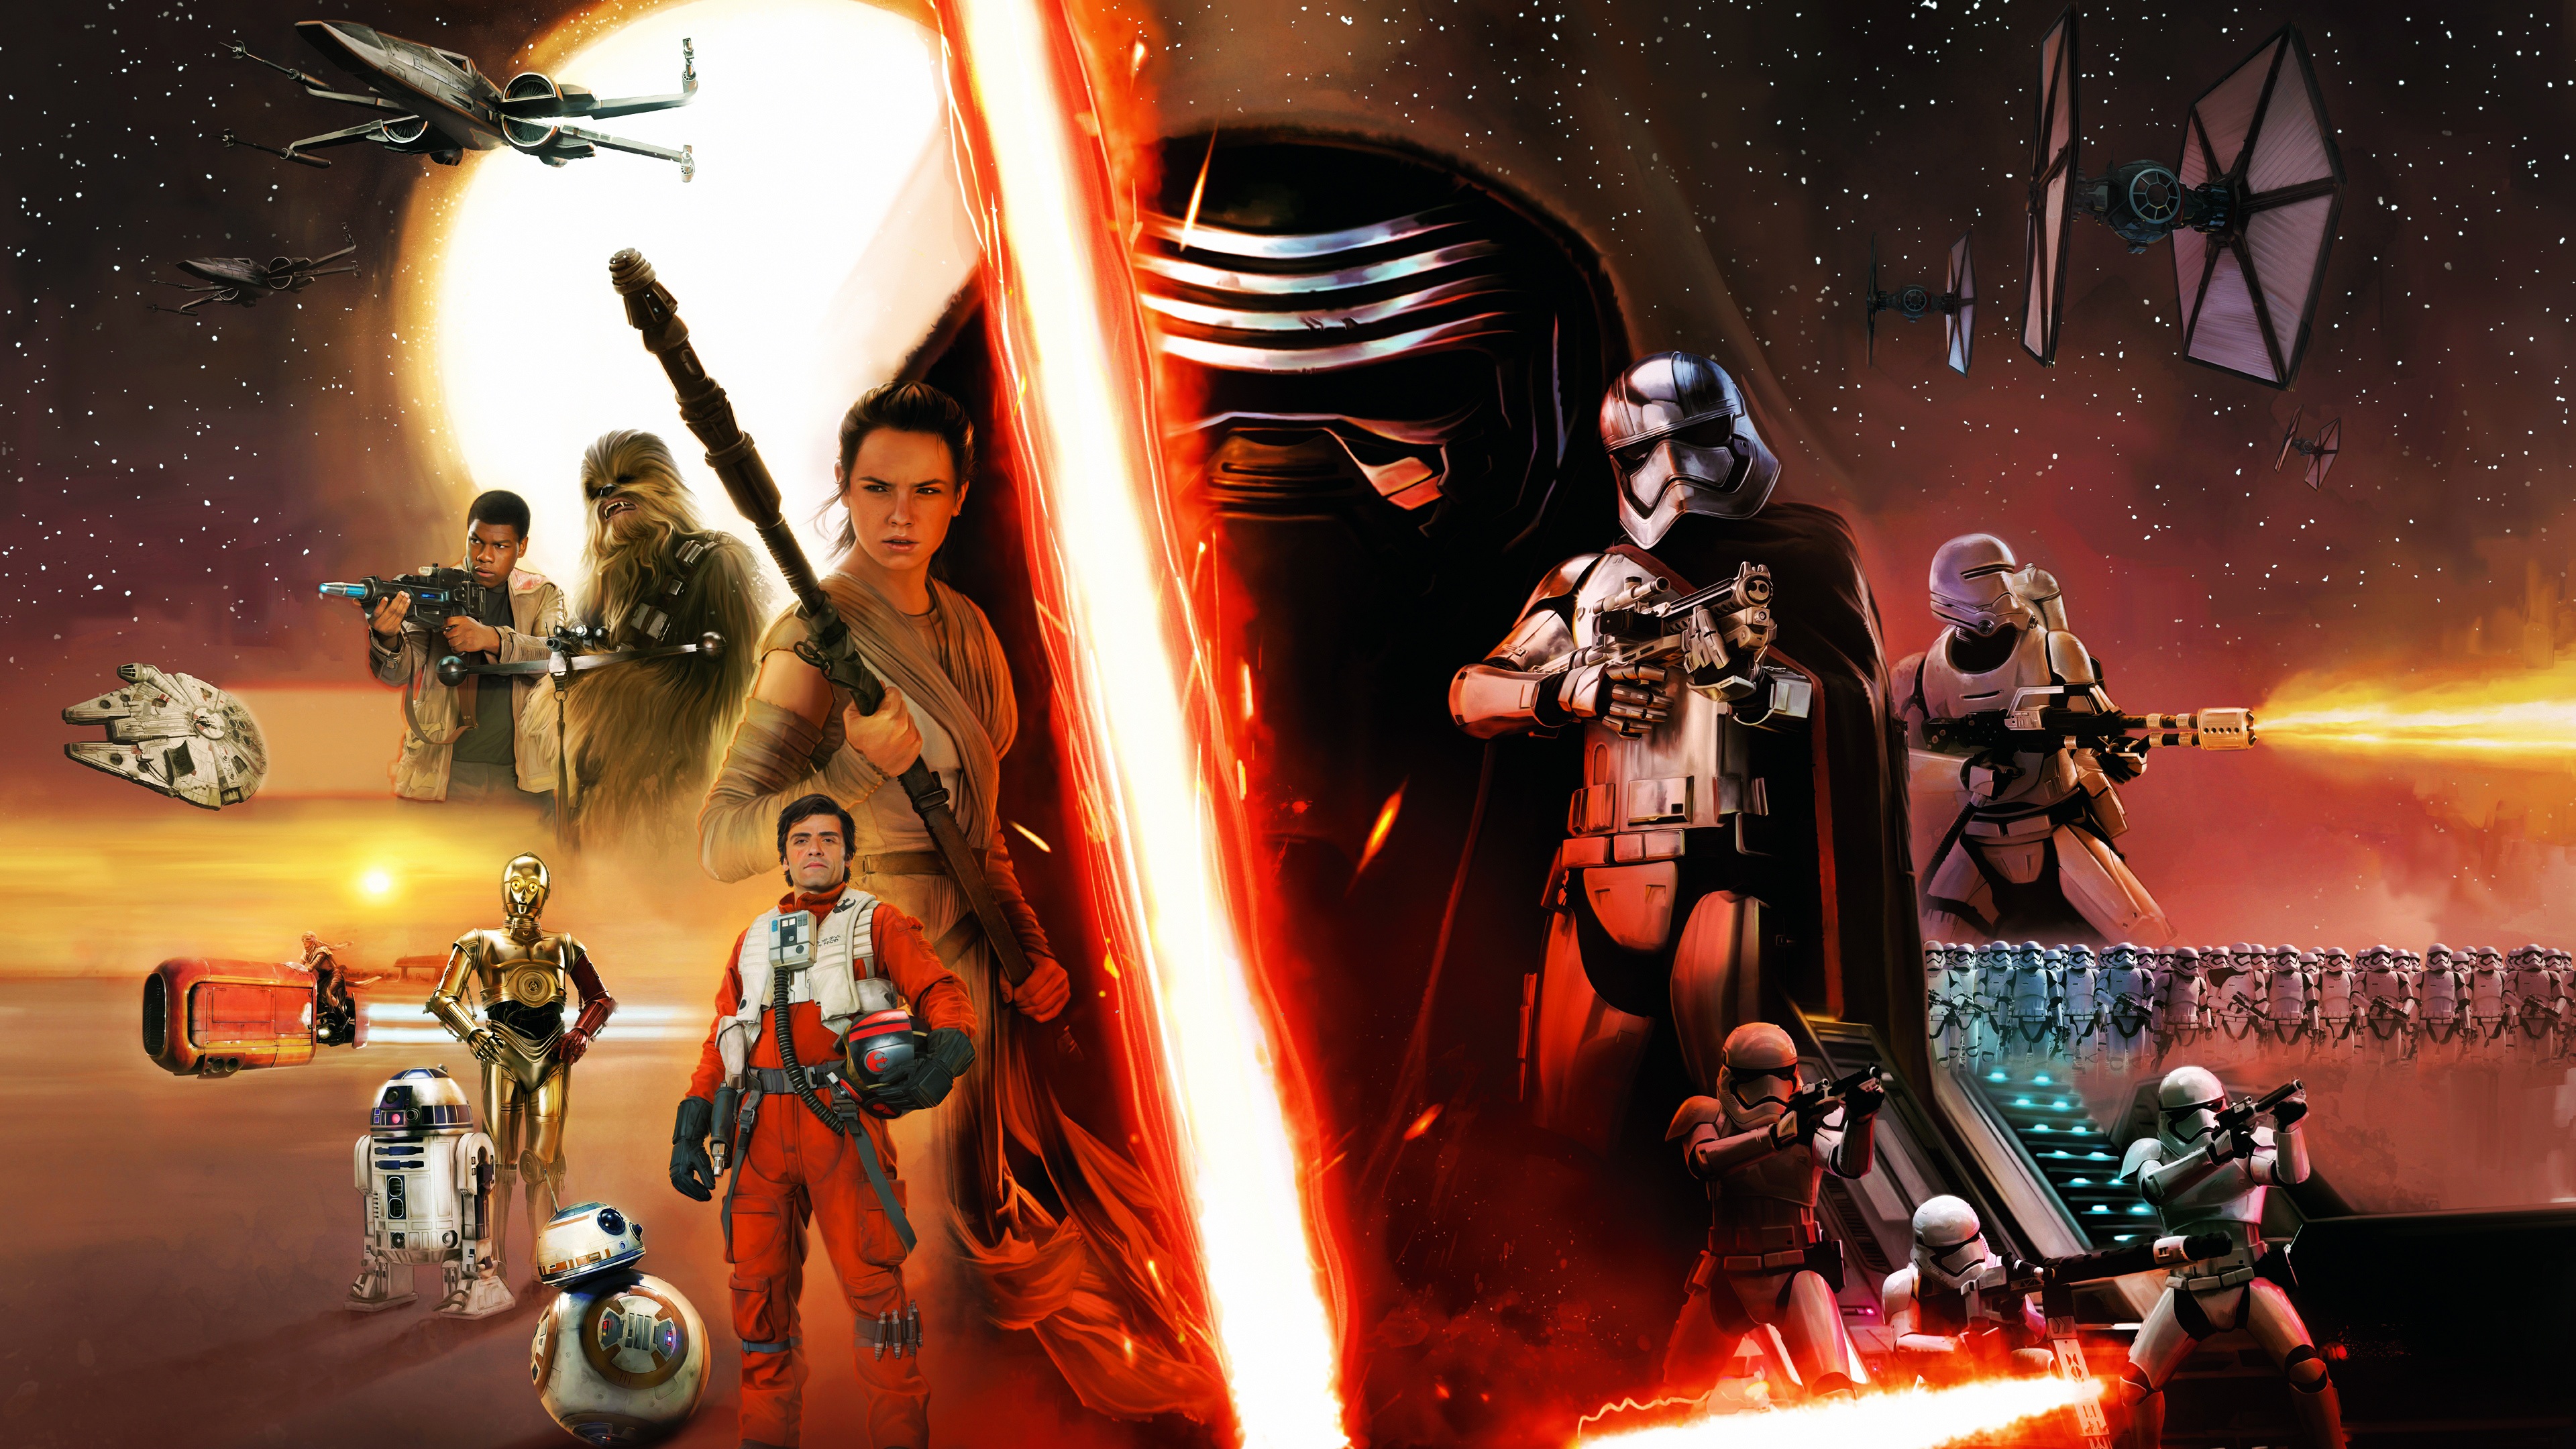 Star Wars Episode VII The Force Awakens Concept Wallpapers HD 3840x2160